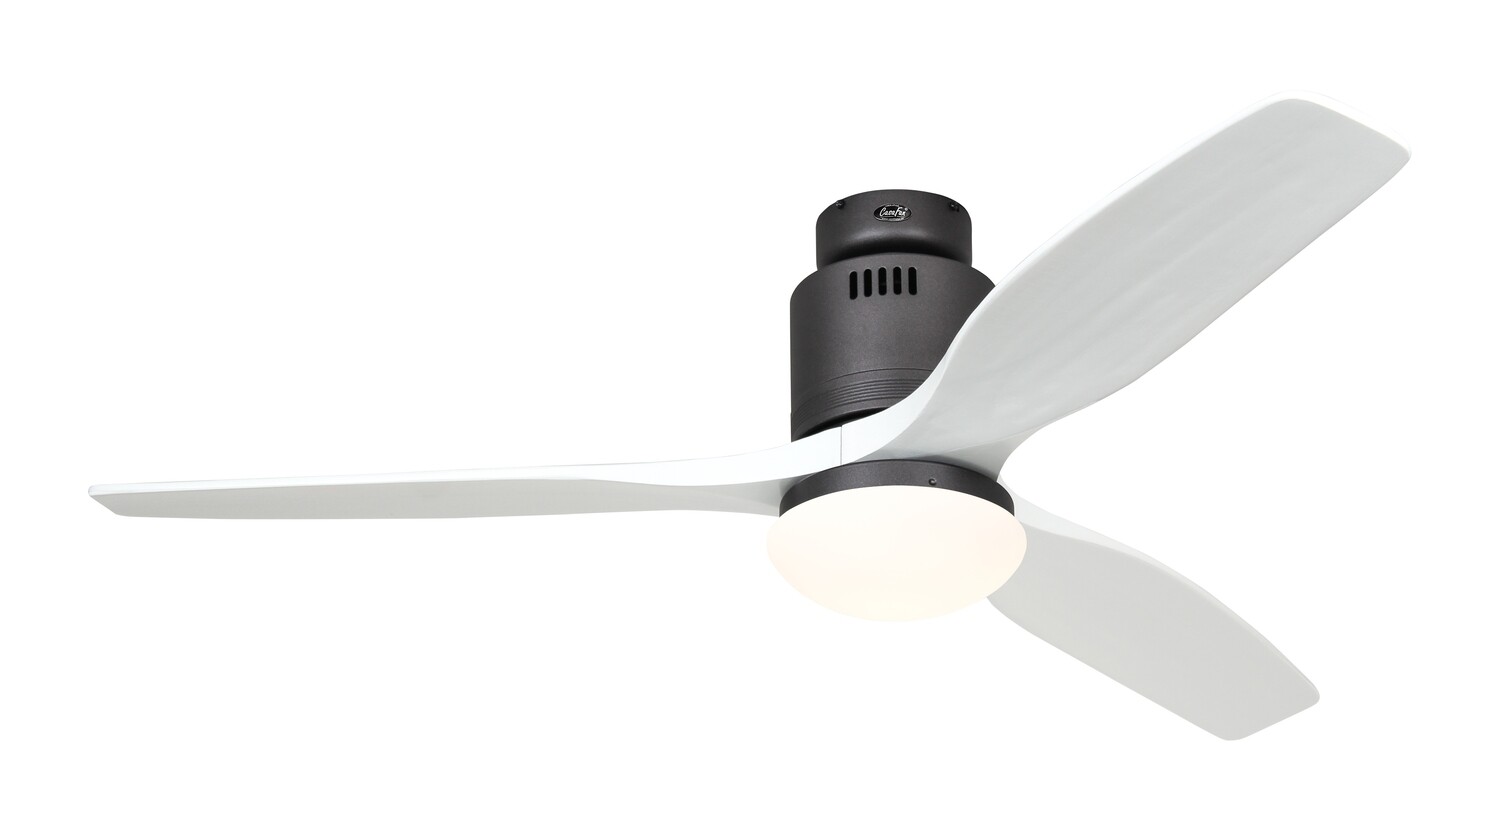 AERODYNAMIX ECO BG energy saving ceiling fan by CASAFAN Ø132 with light kit and remote control included - Basalt Grey /White